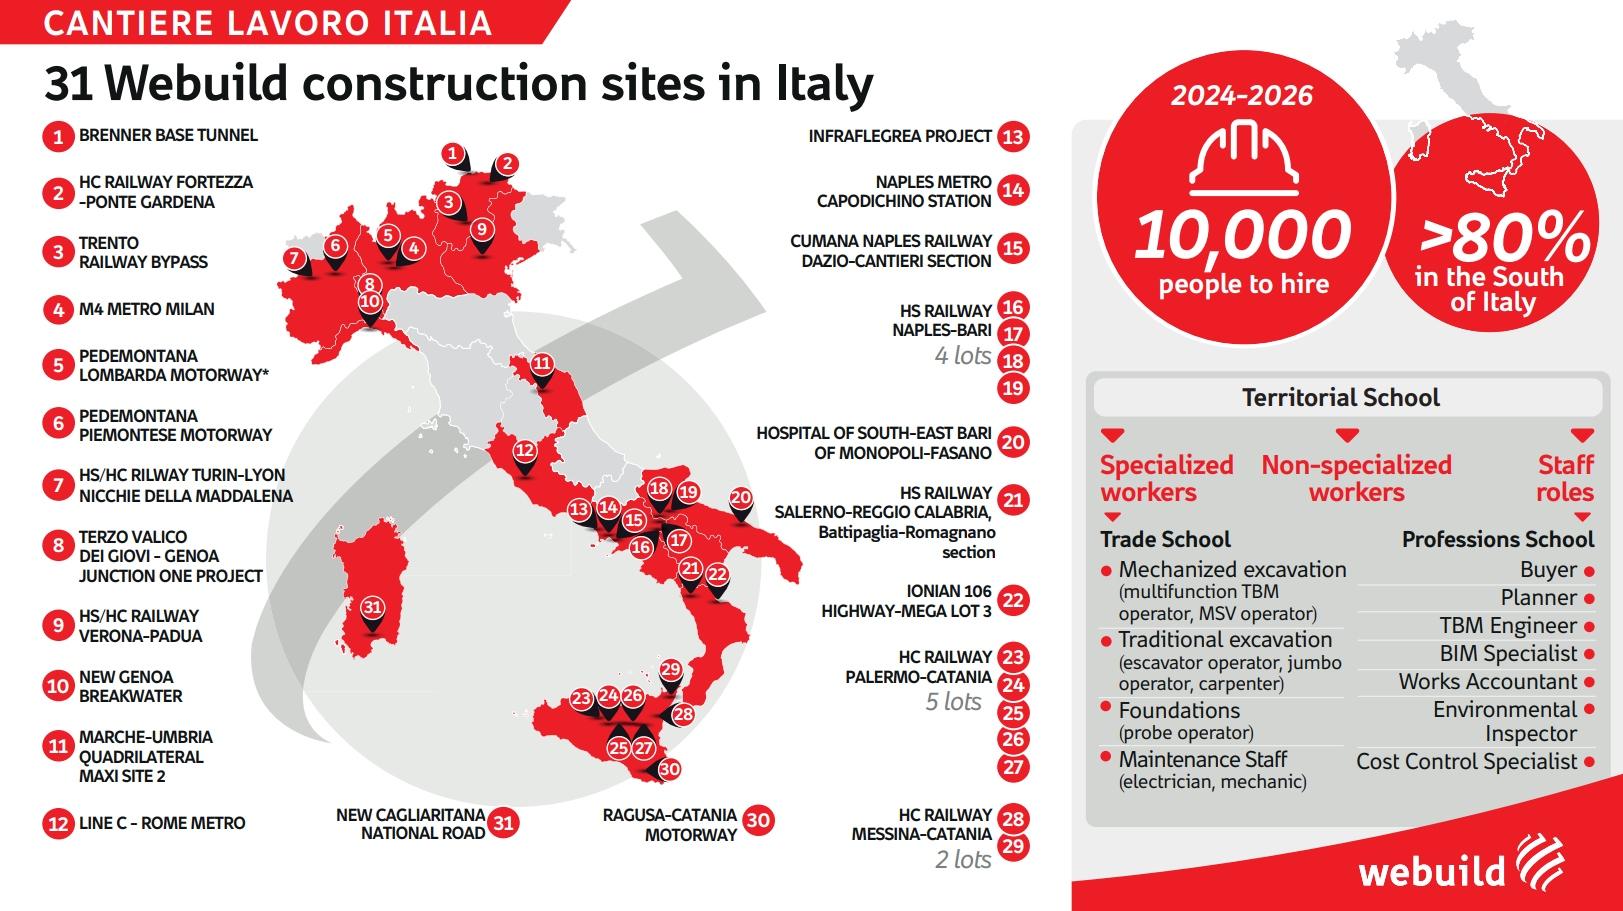 Think big, CANTIERE LAVORO ITALIA. 31 Webuild construction sites in Italy